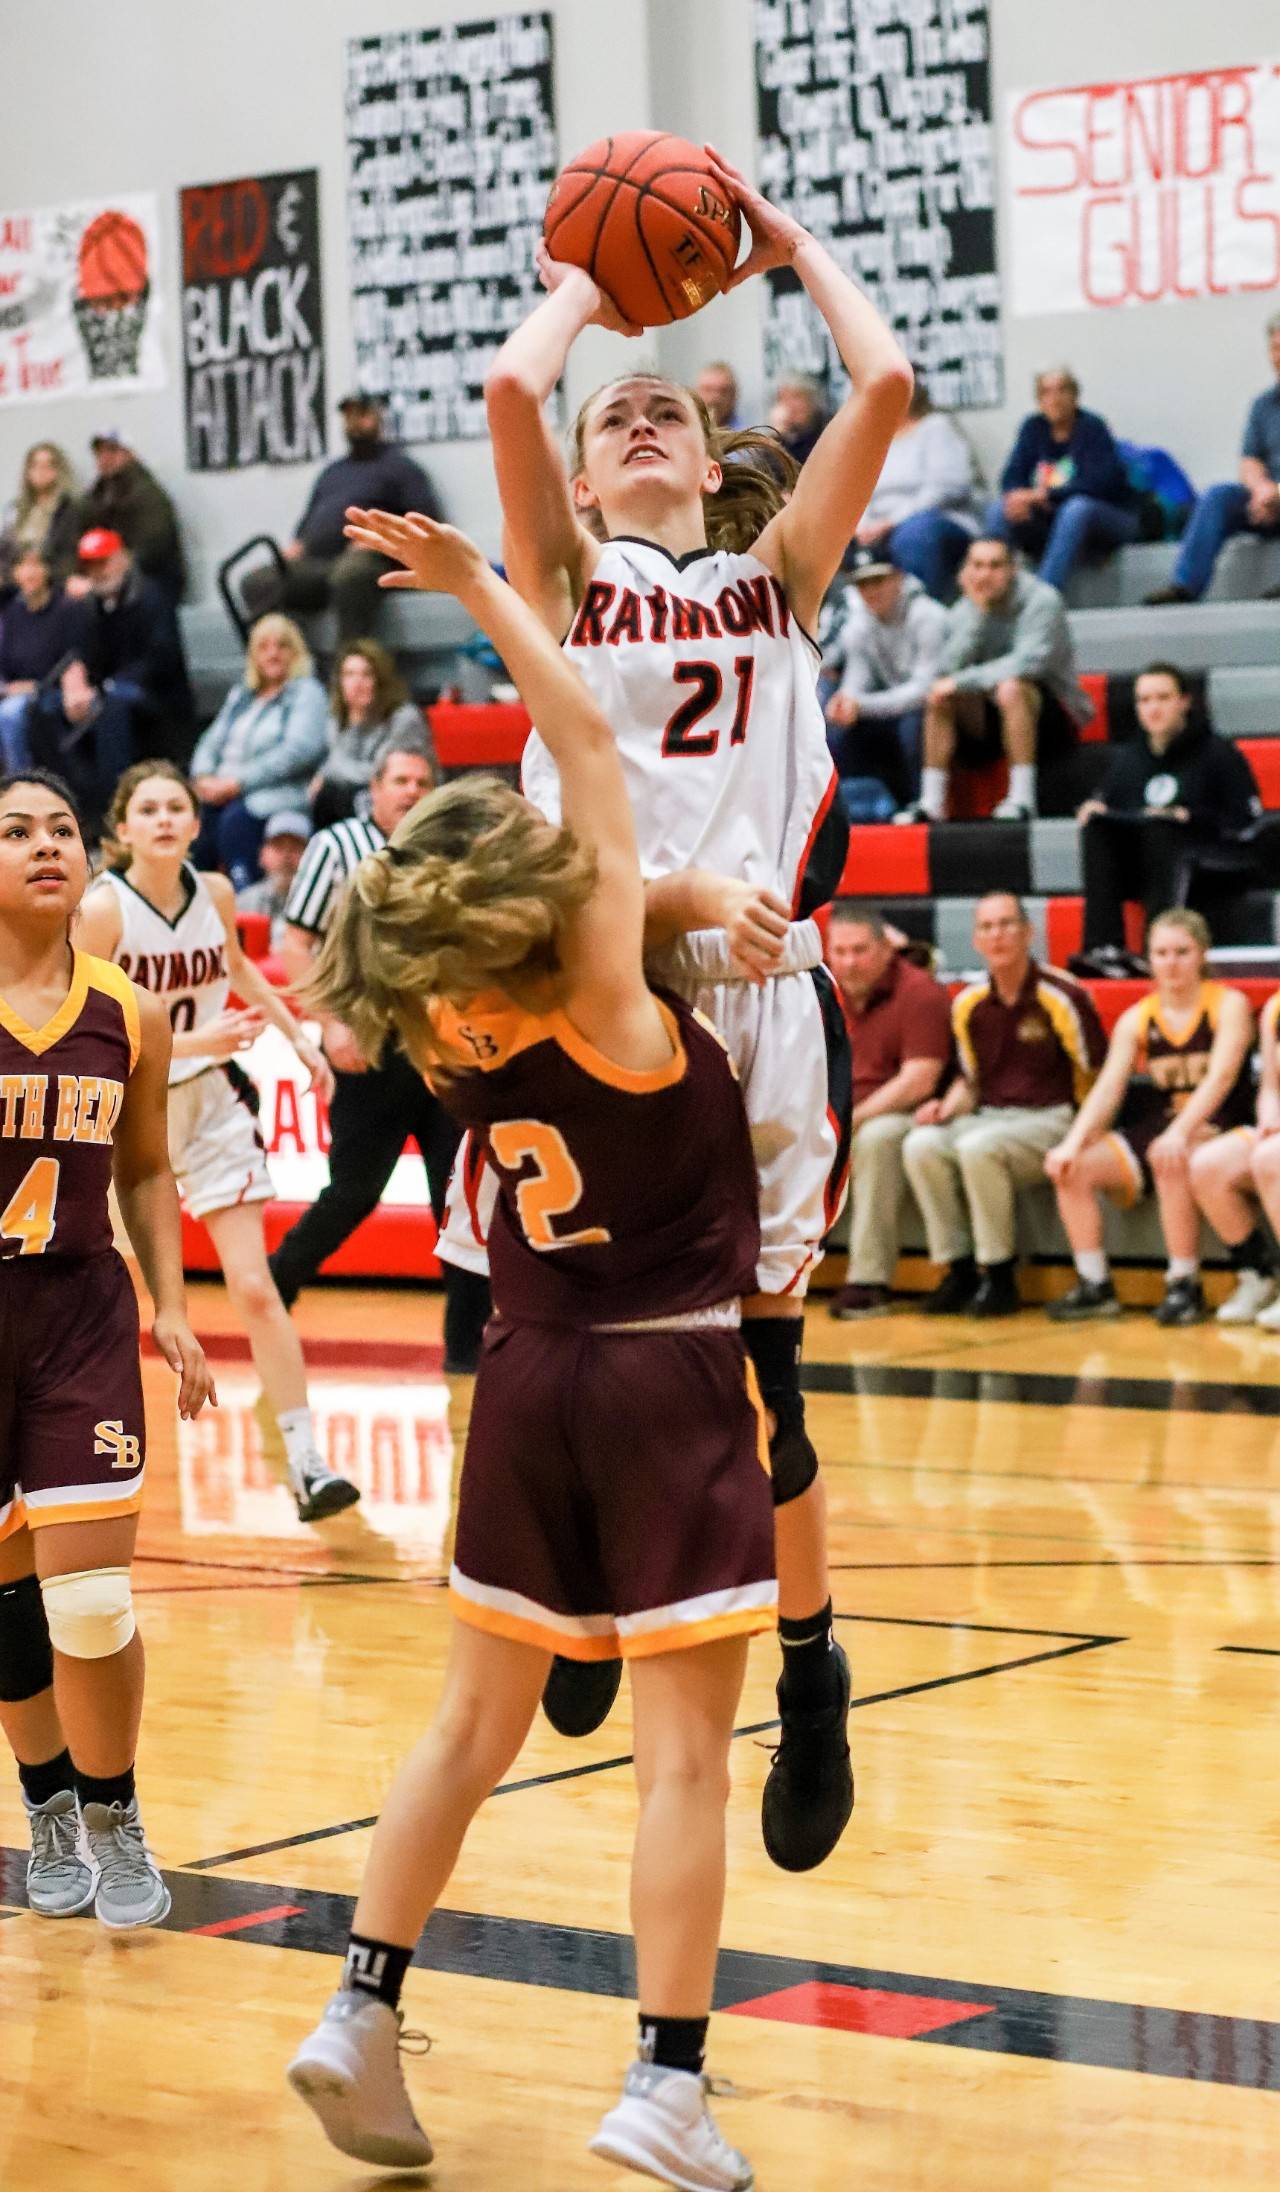 Raymond’s Kyra Gardner (21) puts up a shot against South Bend’s Elli Capps during Raymond’s 59-20 win on Wednesday at Raymond High School. Gardner led all scorers with 22 points. (Photo by Larry Bale)